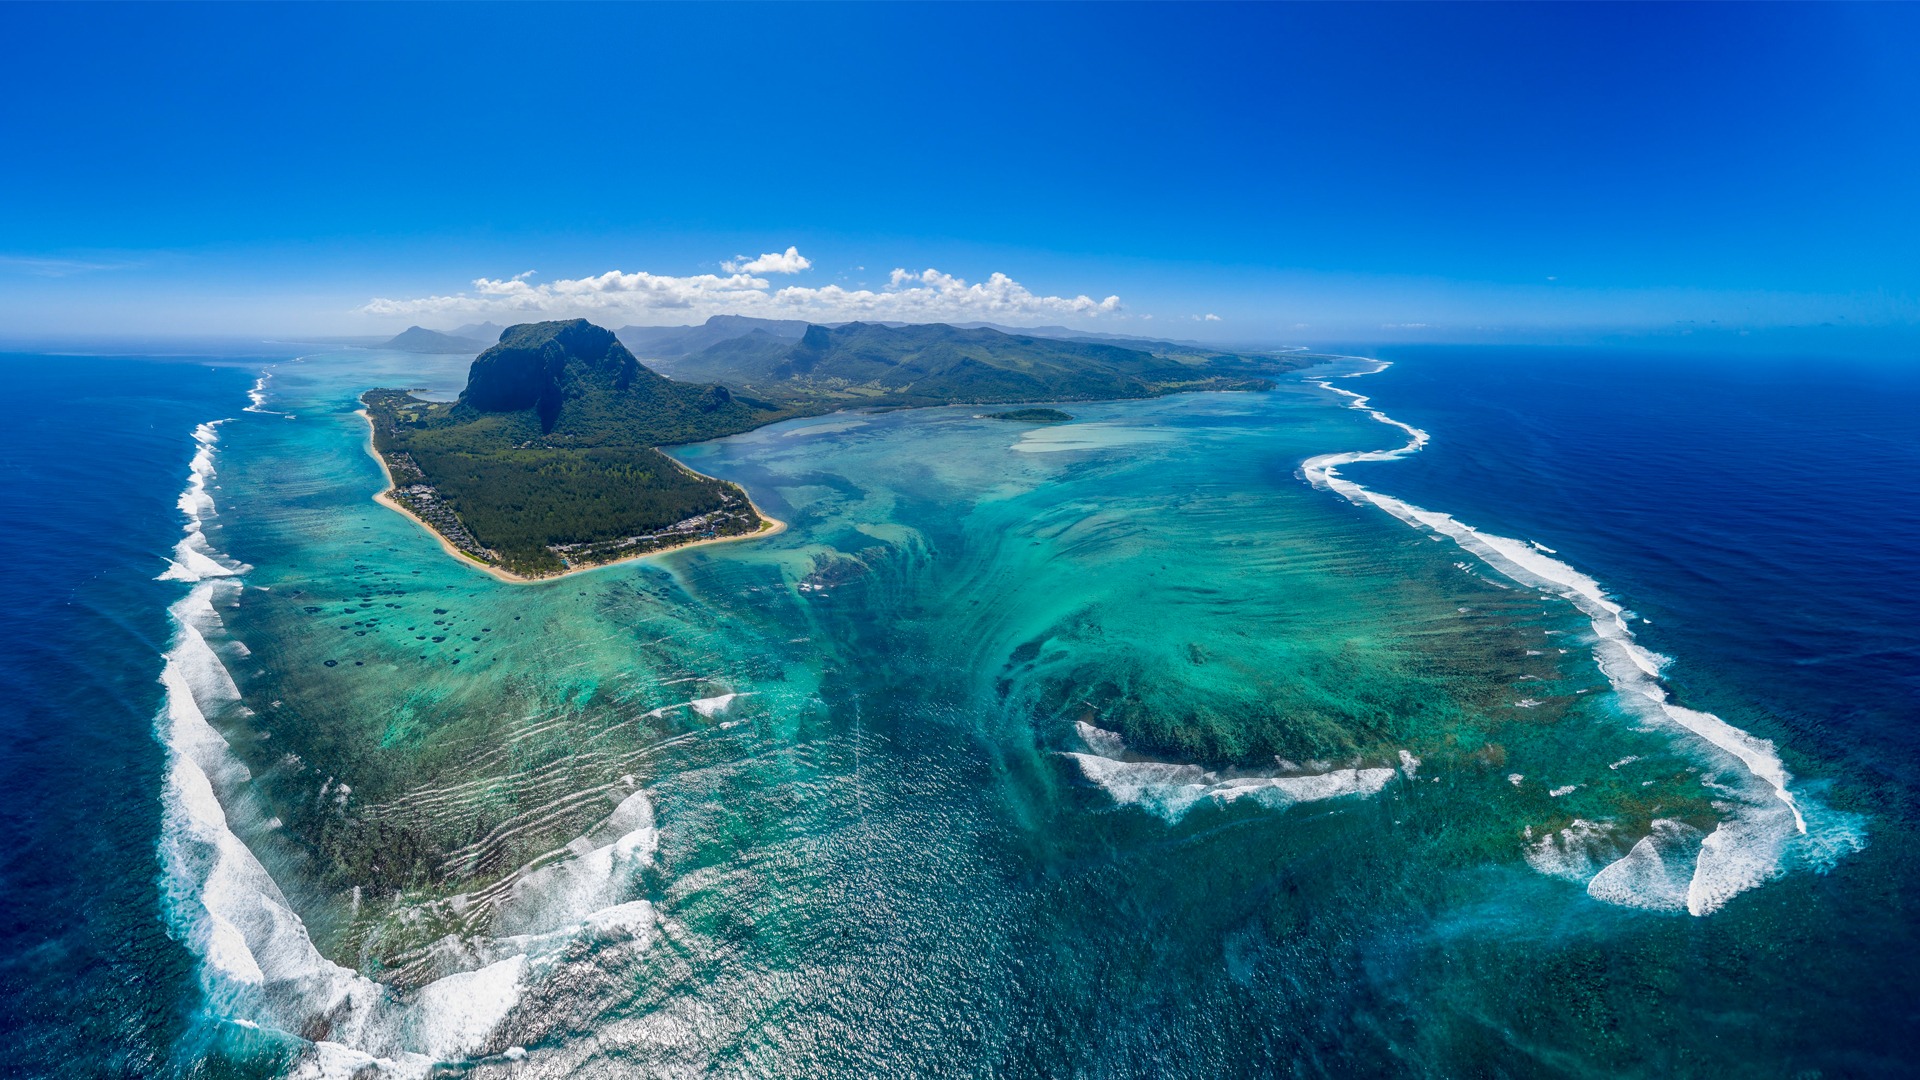 Image from https://www.andbeyond.com/destinations/indian-ocean-islands/mauritius/